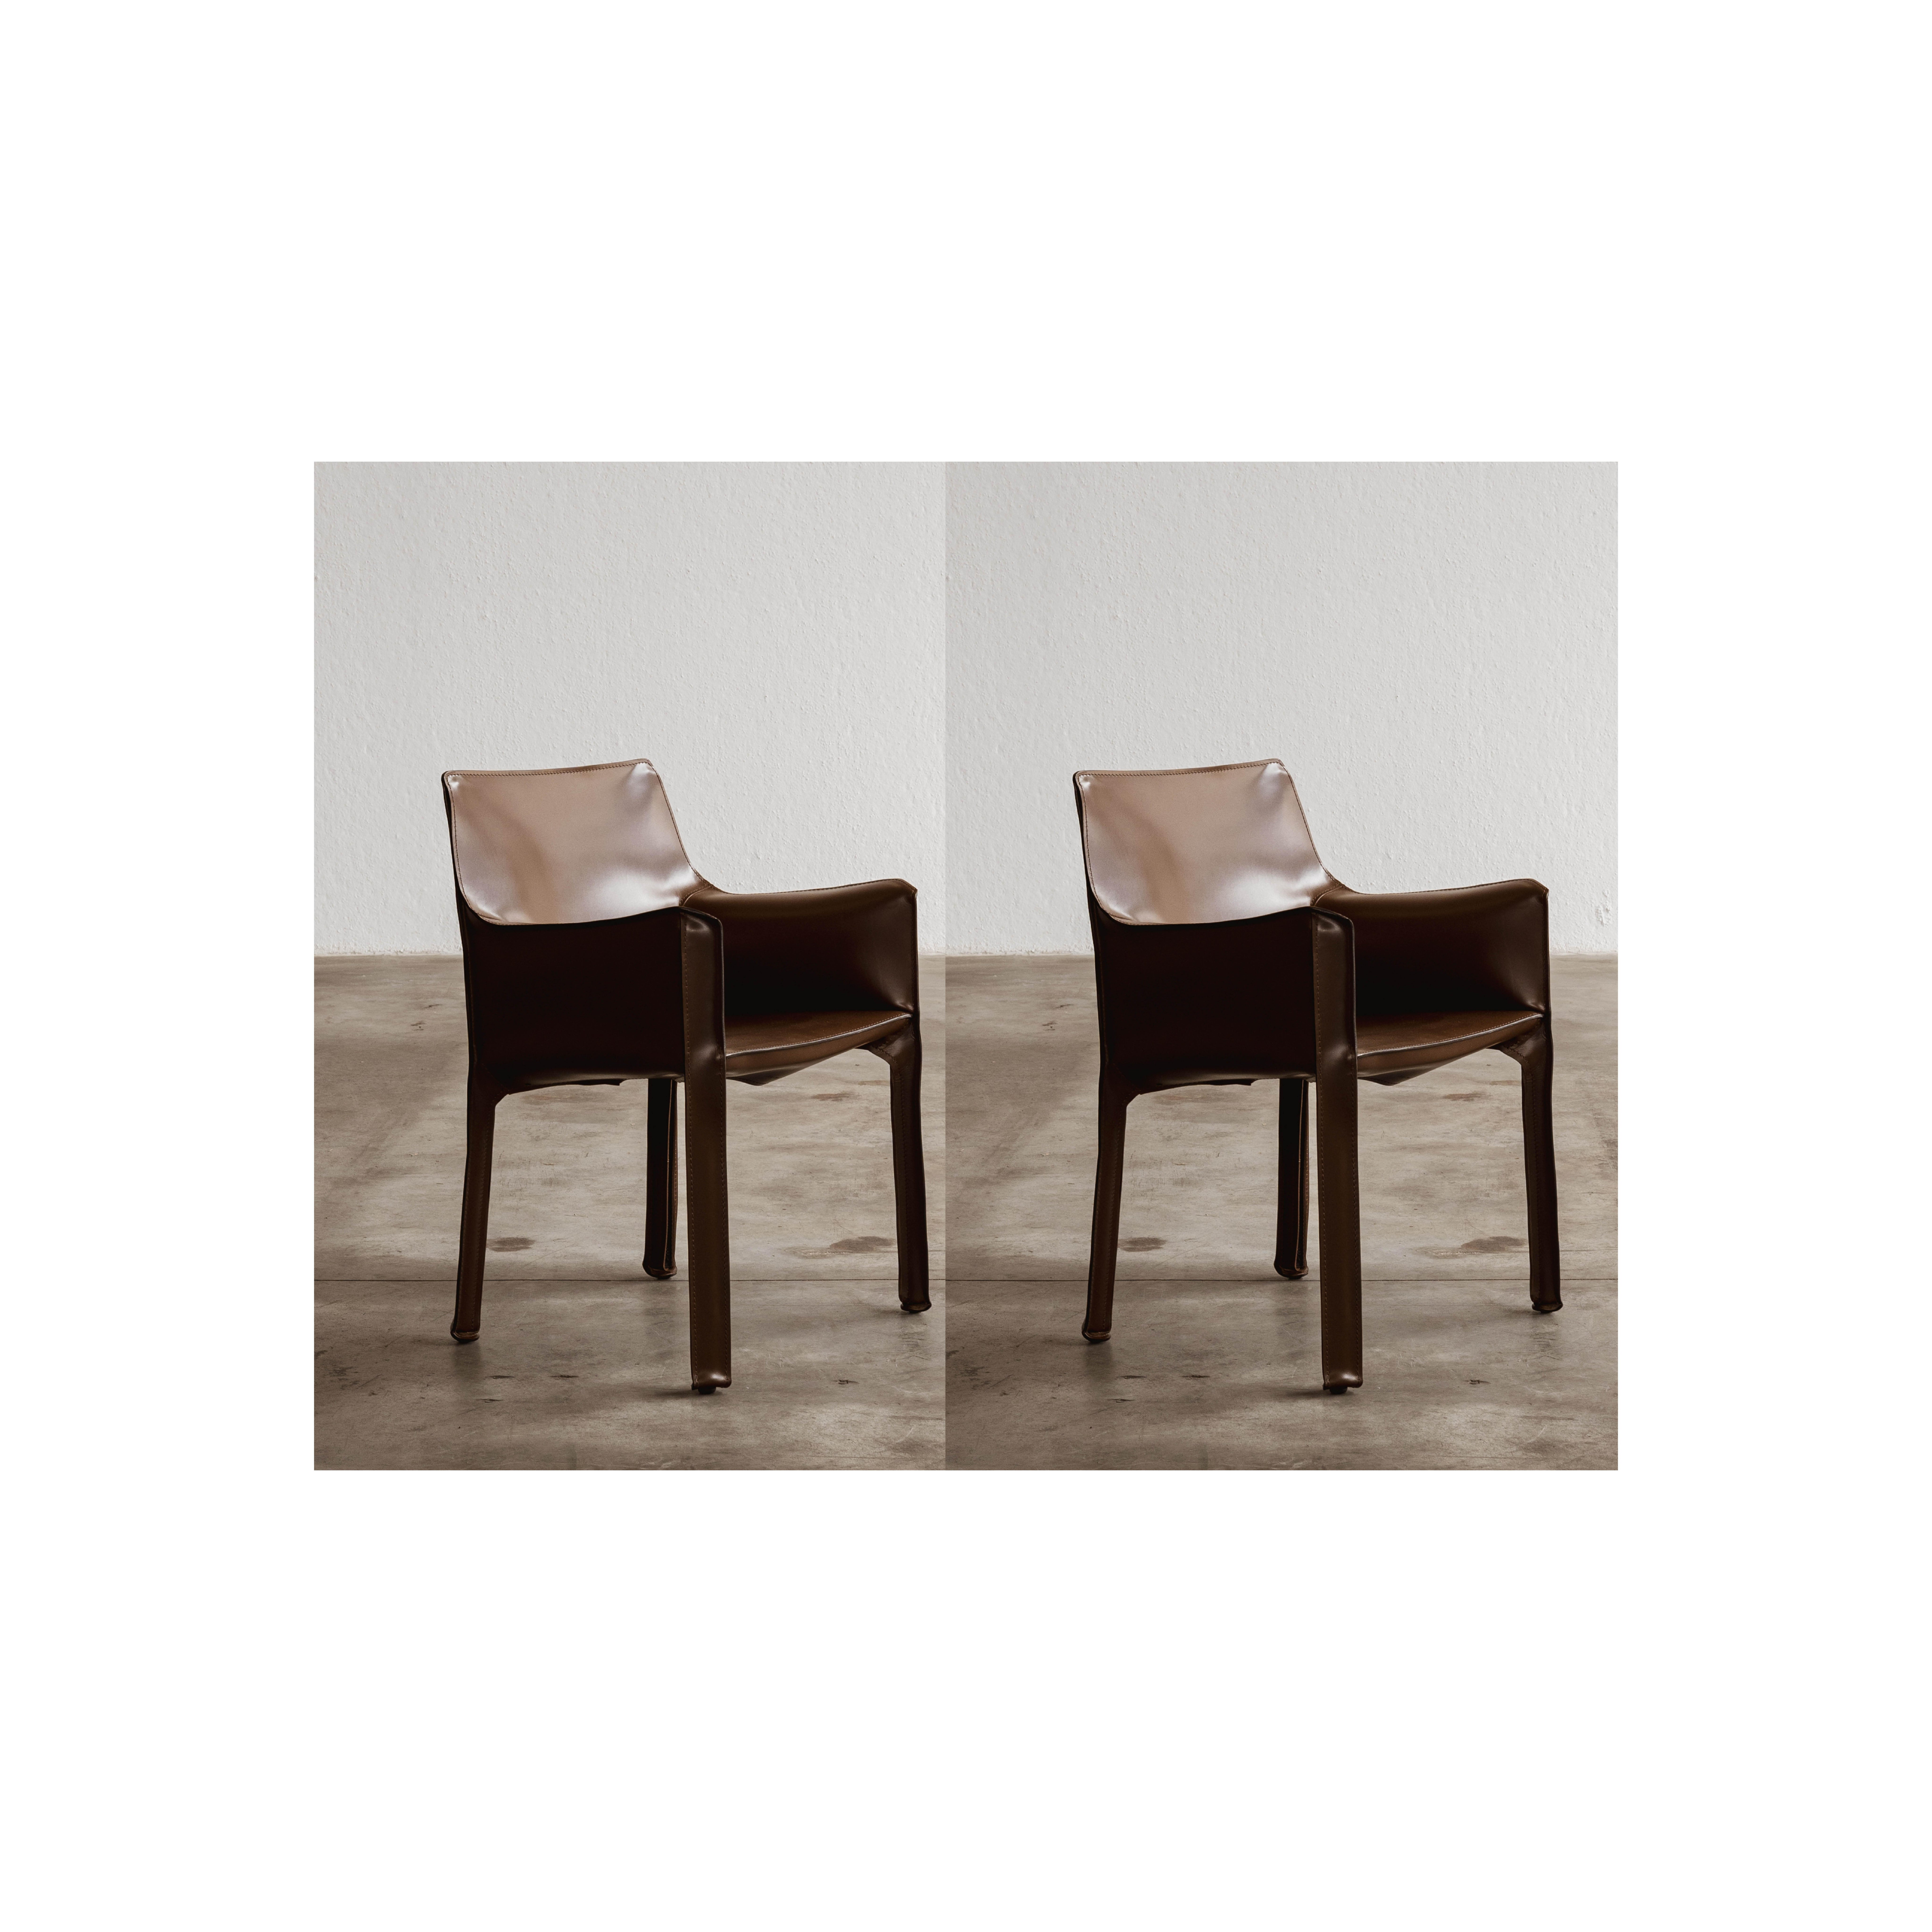 Mario Bellini "CAB 413" Chairs for Cassina in Dark Brown, 1977, Set of 2